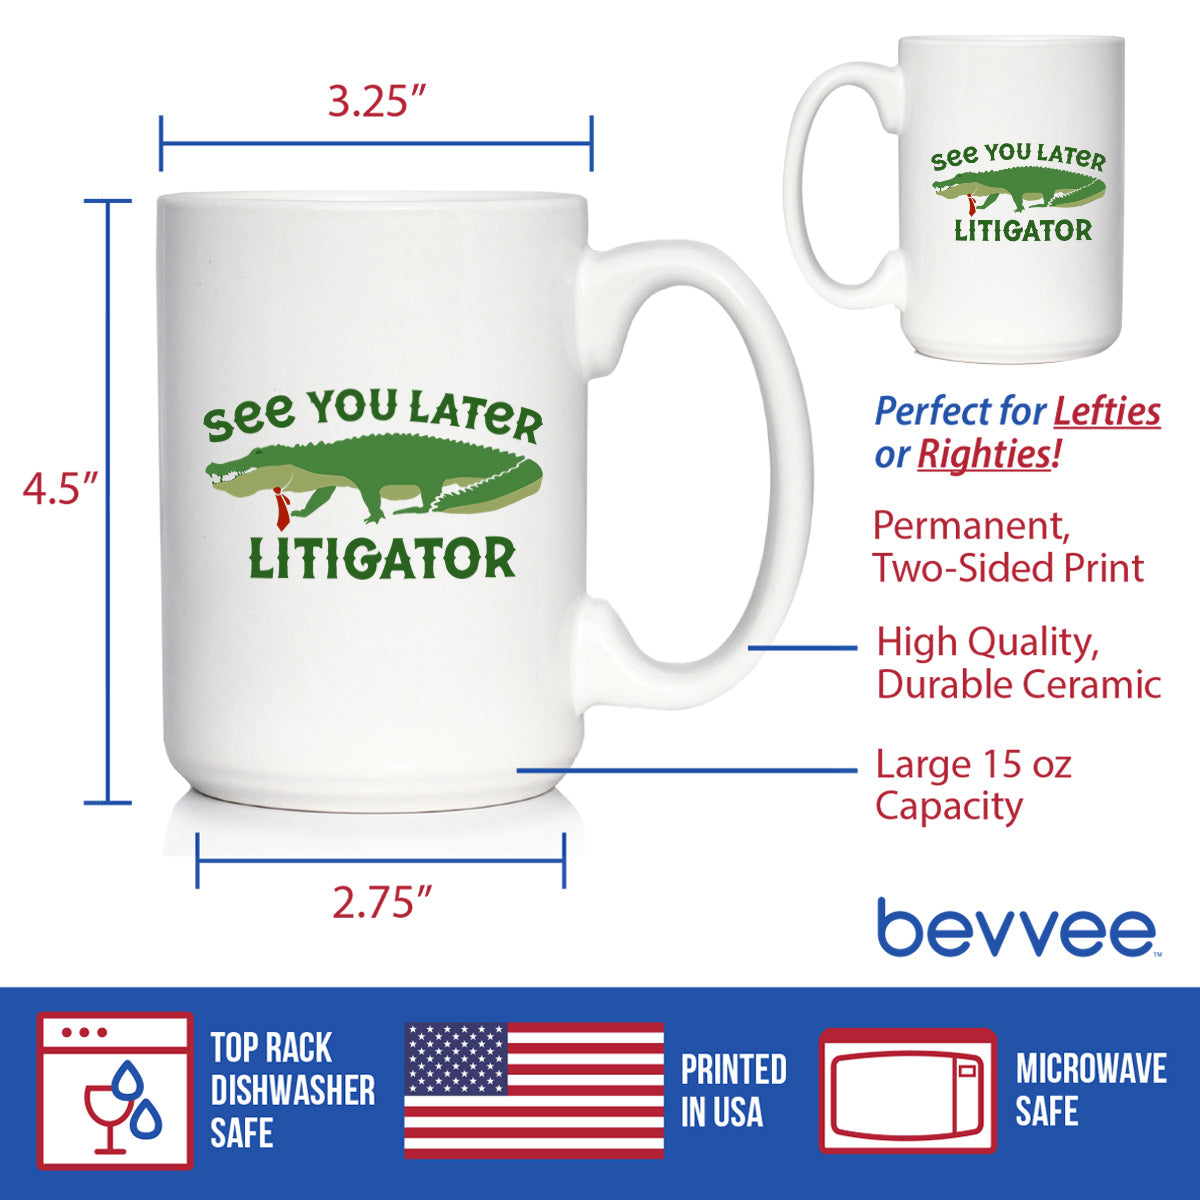 See You Later Litigator Coffee Mug - Funny Lawyer Gifts for Attorneys and Law School Graduates